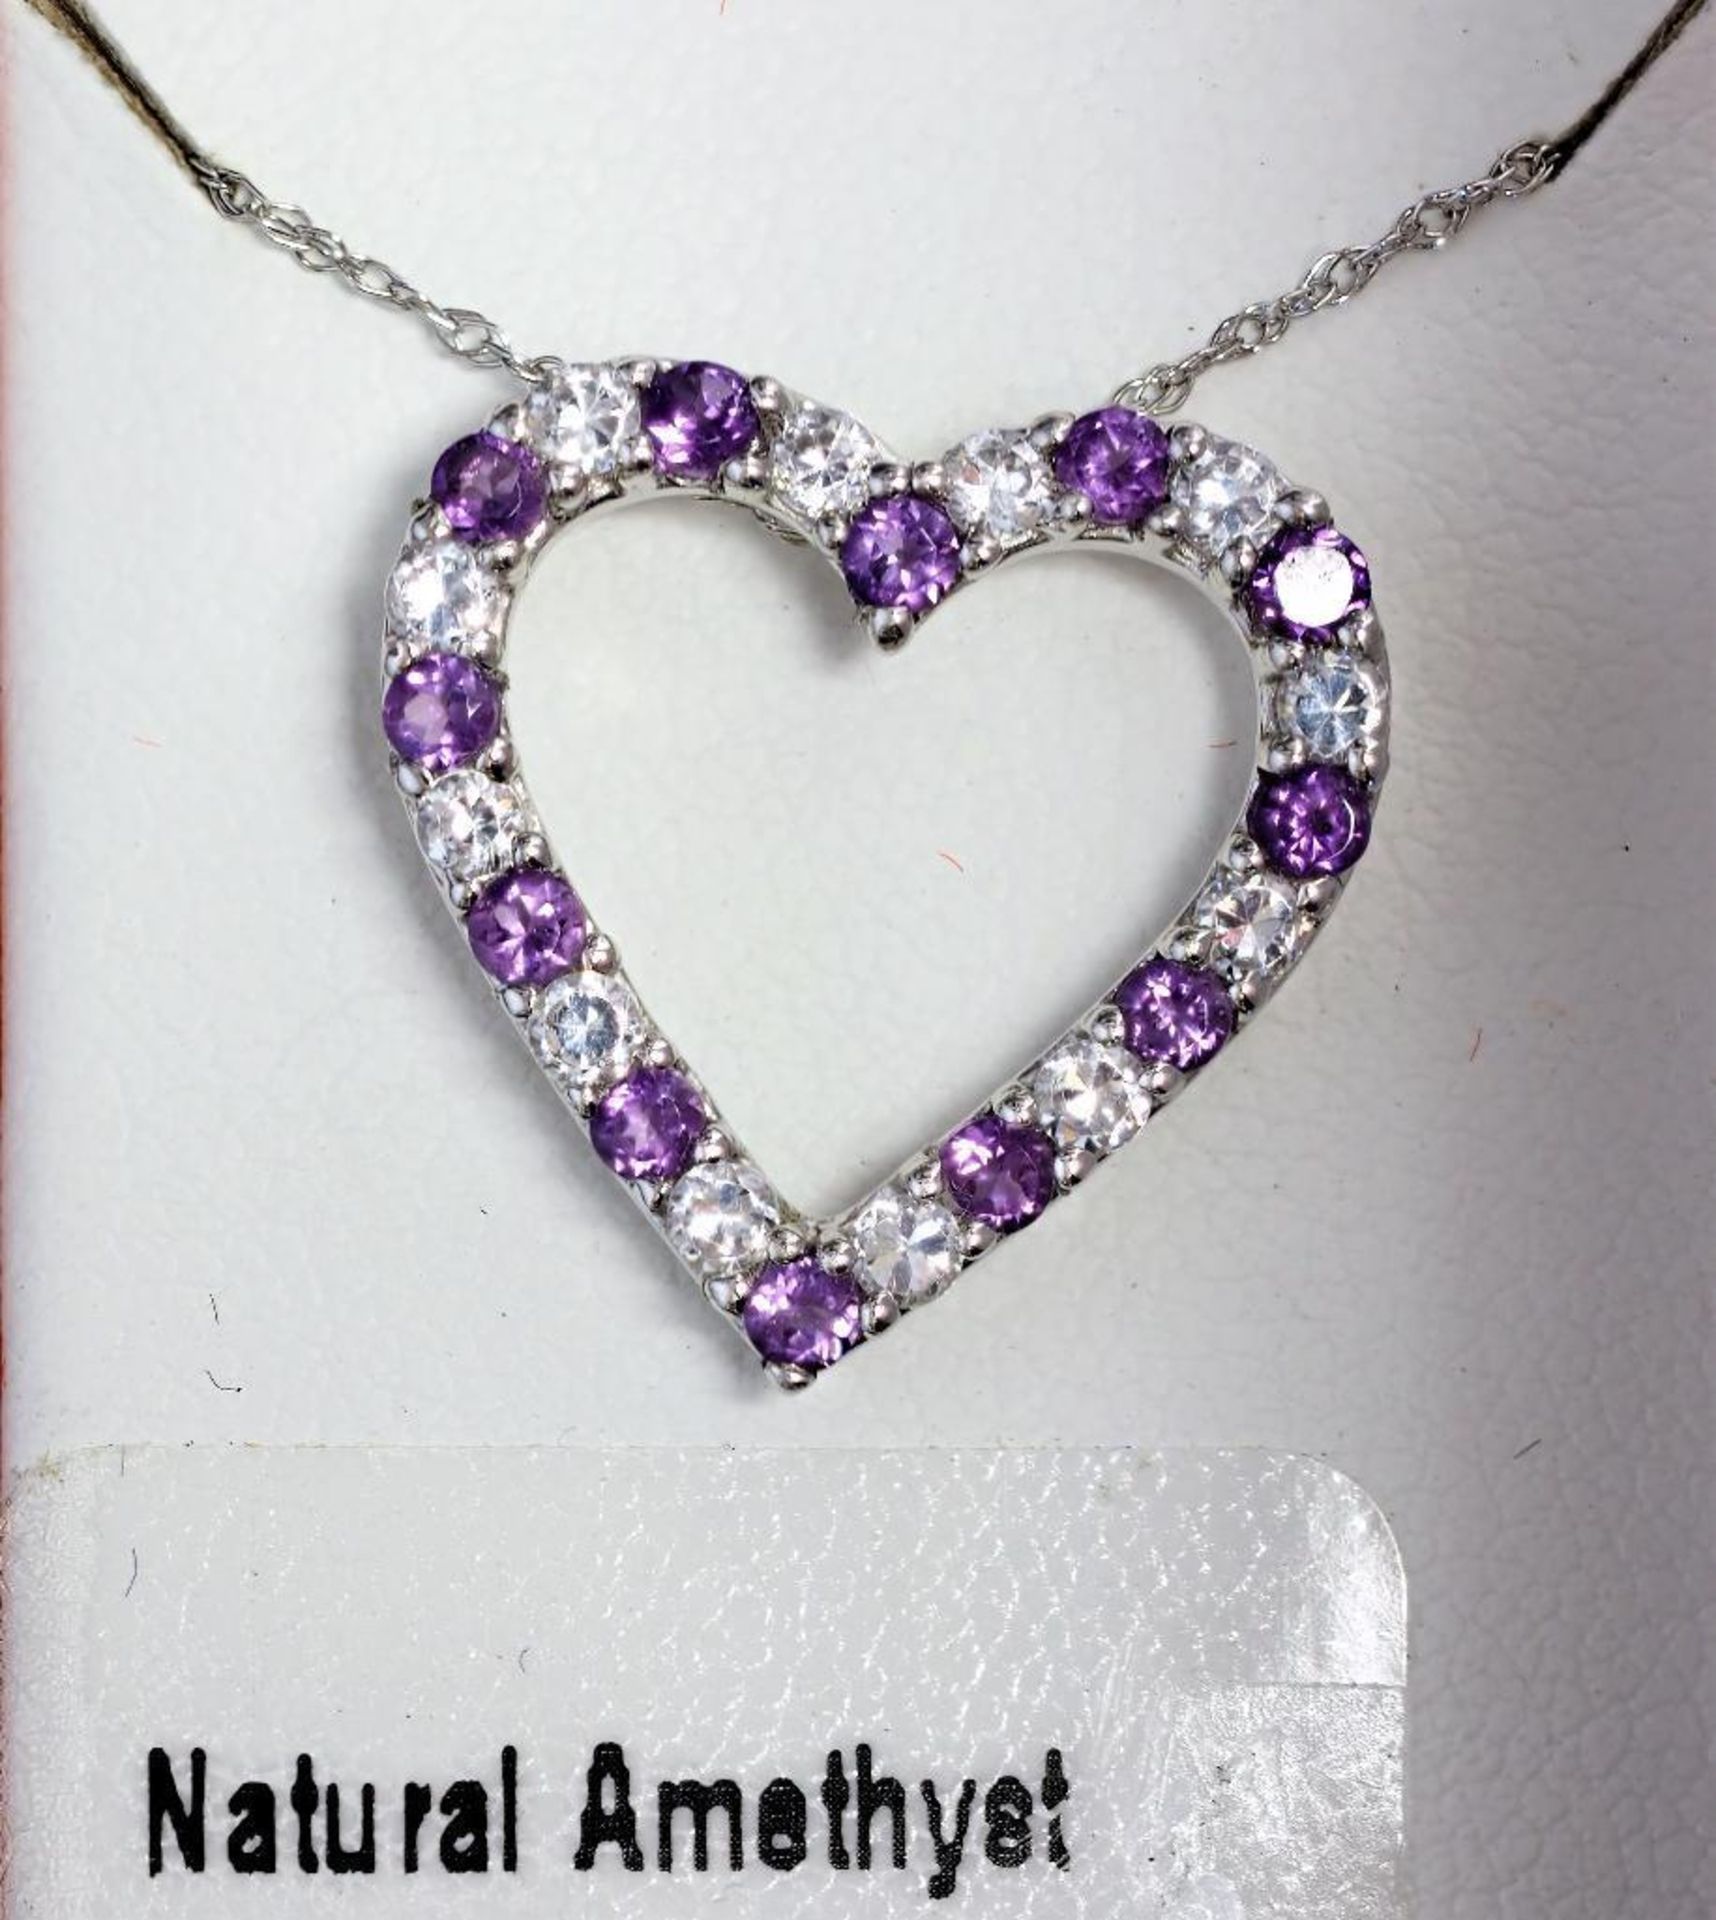 Sterling Silver Heart Shaped Necklace Wth Genuine Amethyst, Retail $120